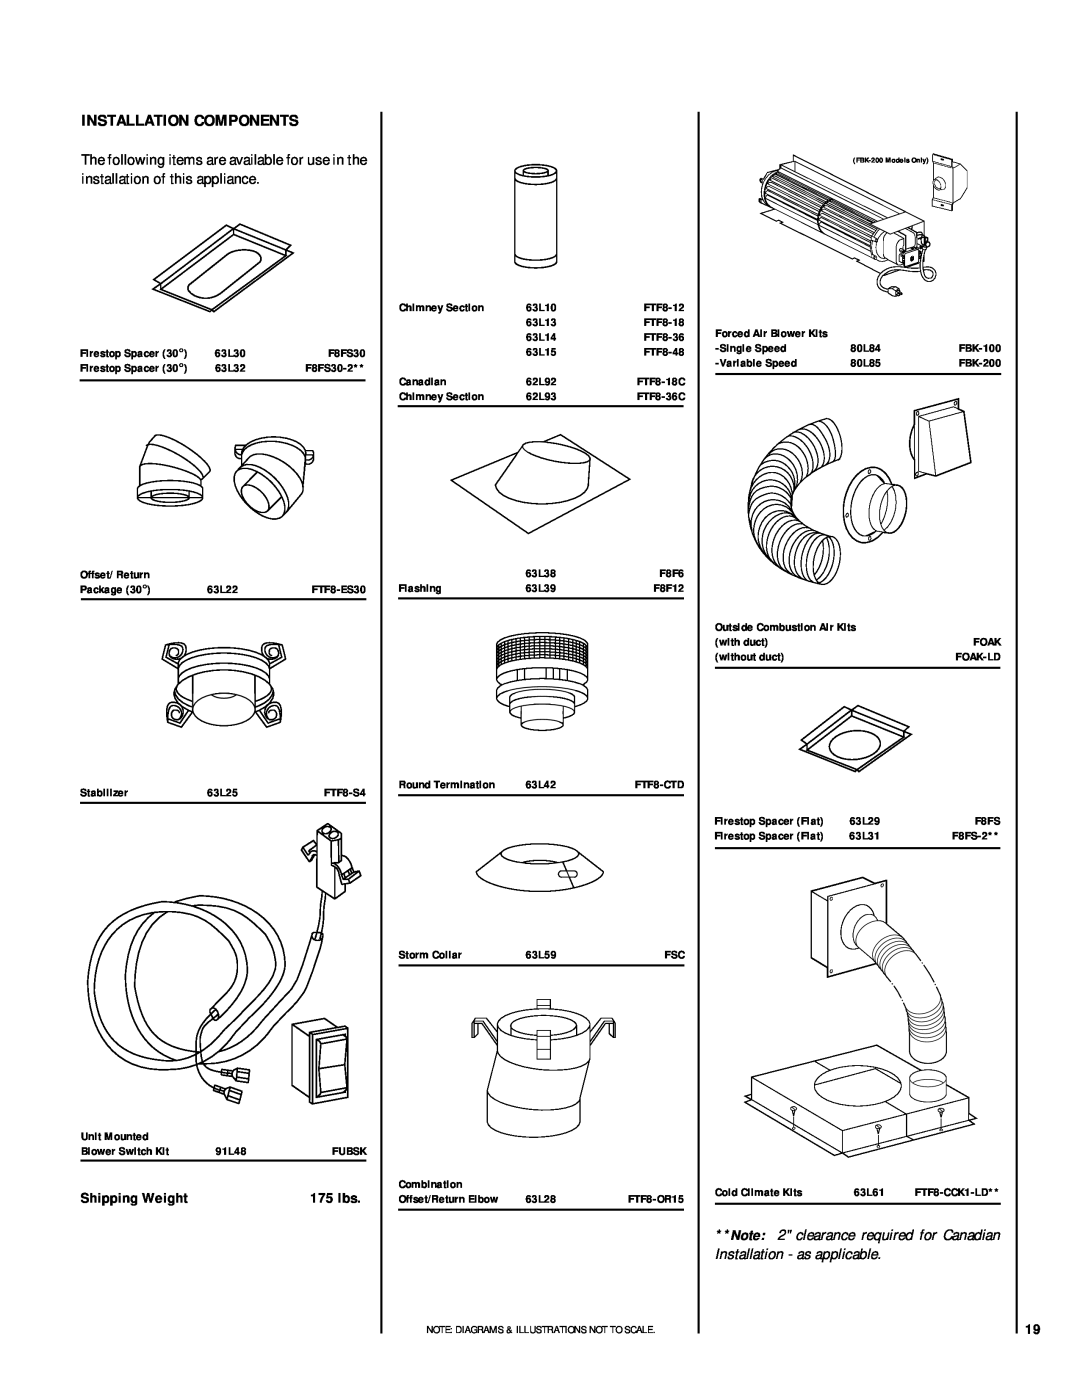 Superior BC-36-2, BCI-36, BR-36-2 installation instructions Installation Components, Shipping Weight, 175 lbs 